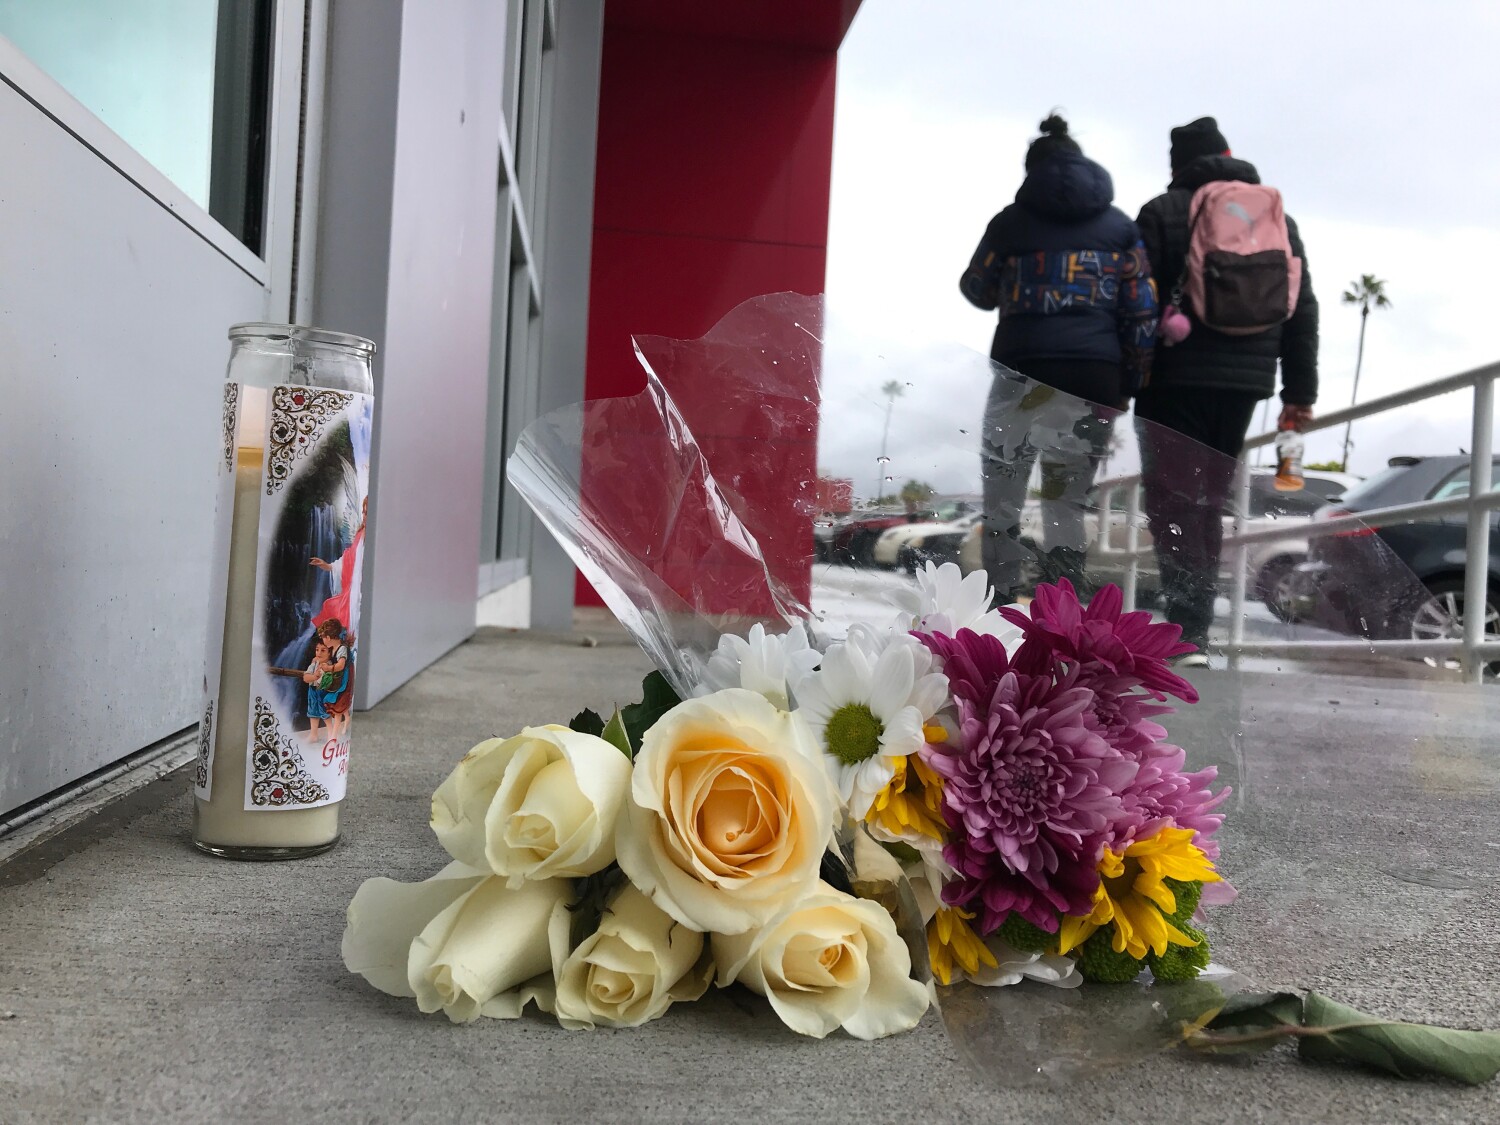 A 'shy girl' from Chile, shot by LAPD while shopping, died in her mother's arms